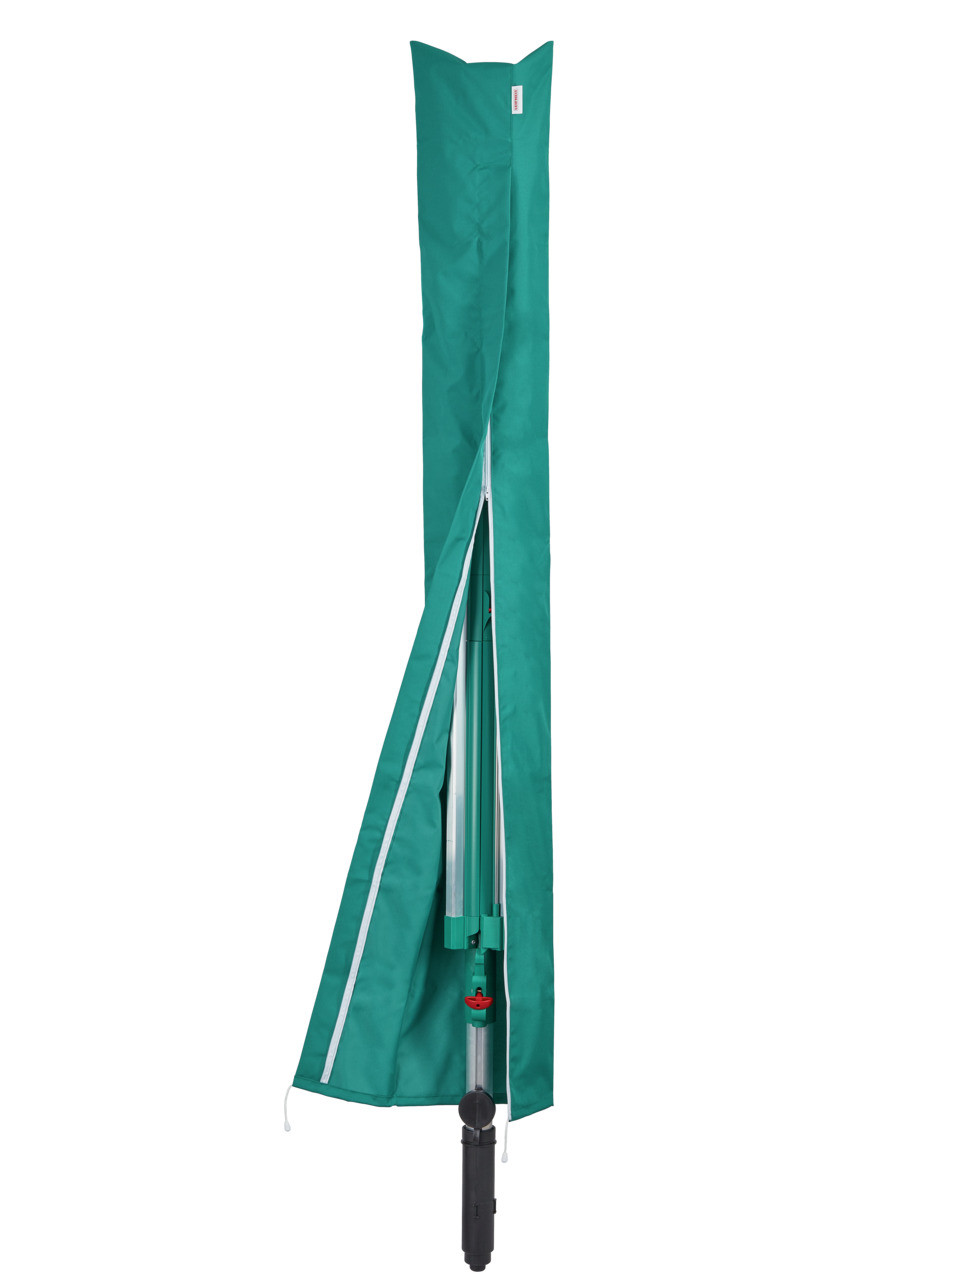 Leifheit Rotary Dryer - Laundry Protective Company Cover